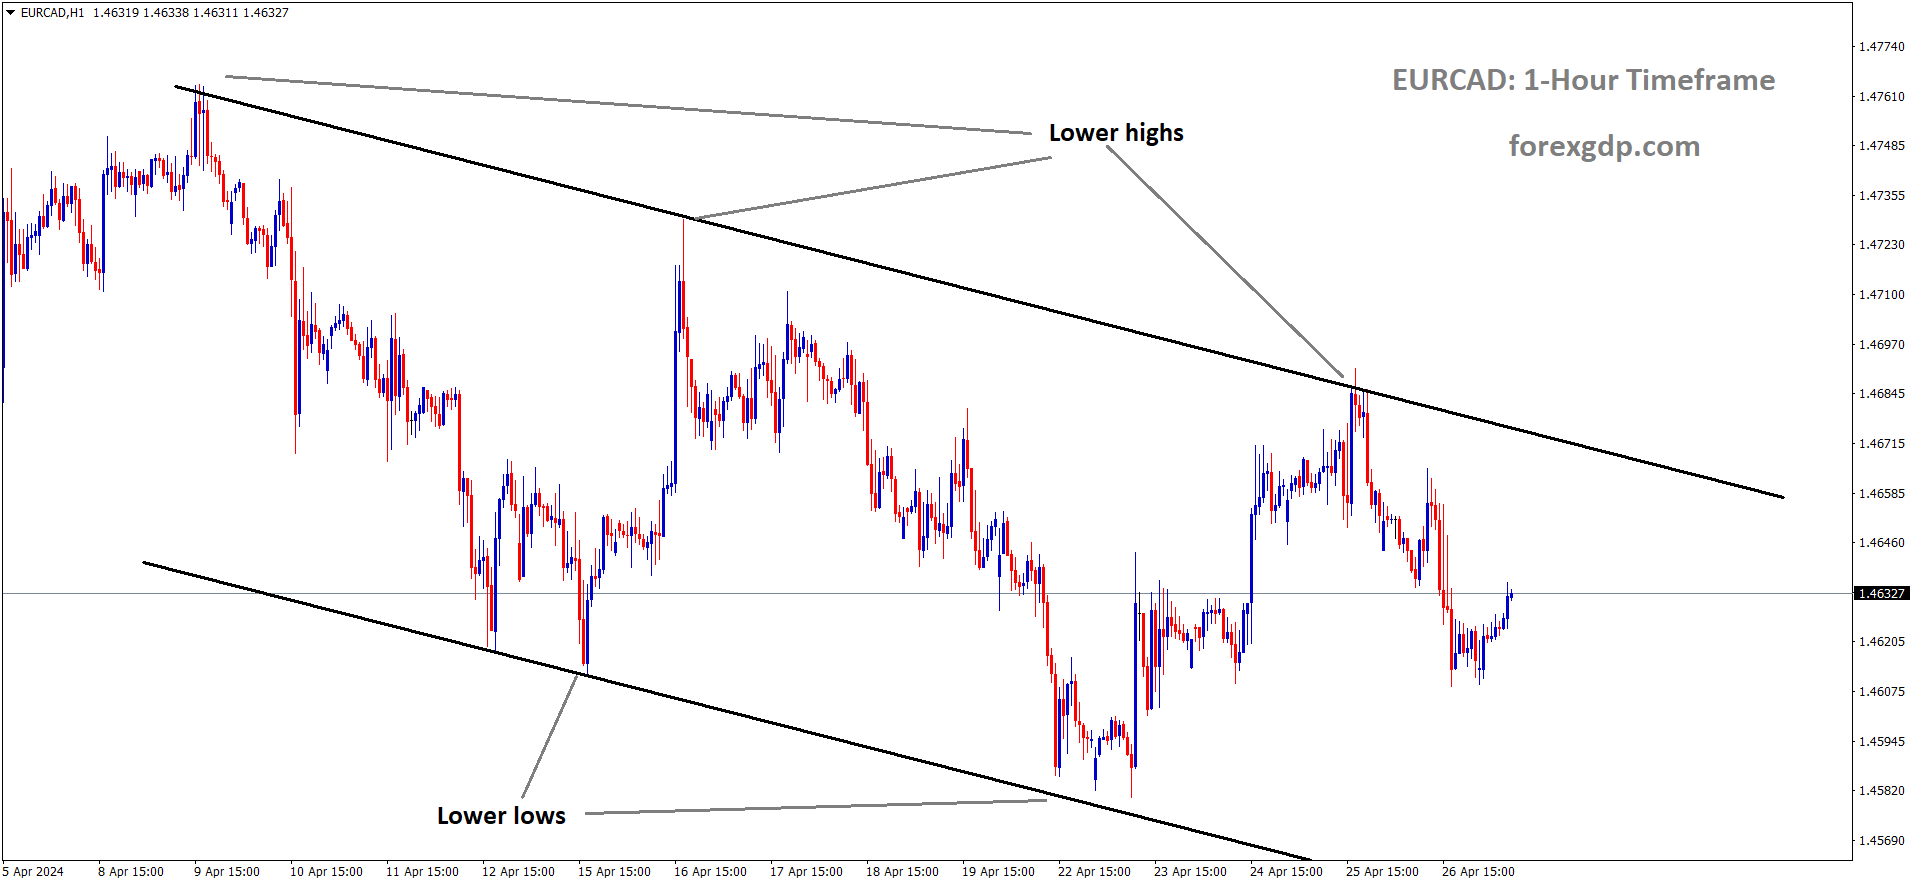 EURCAD is moving in Descending channel and market has fallen from the lower high area of the channel